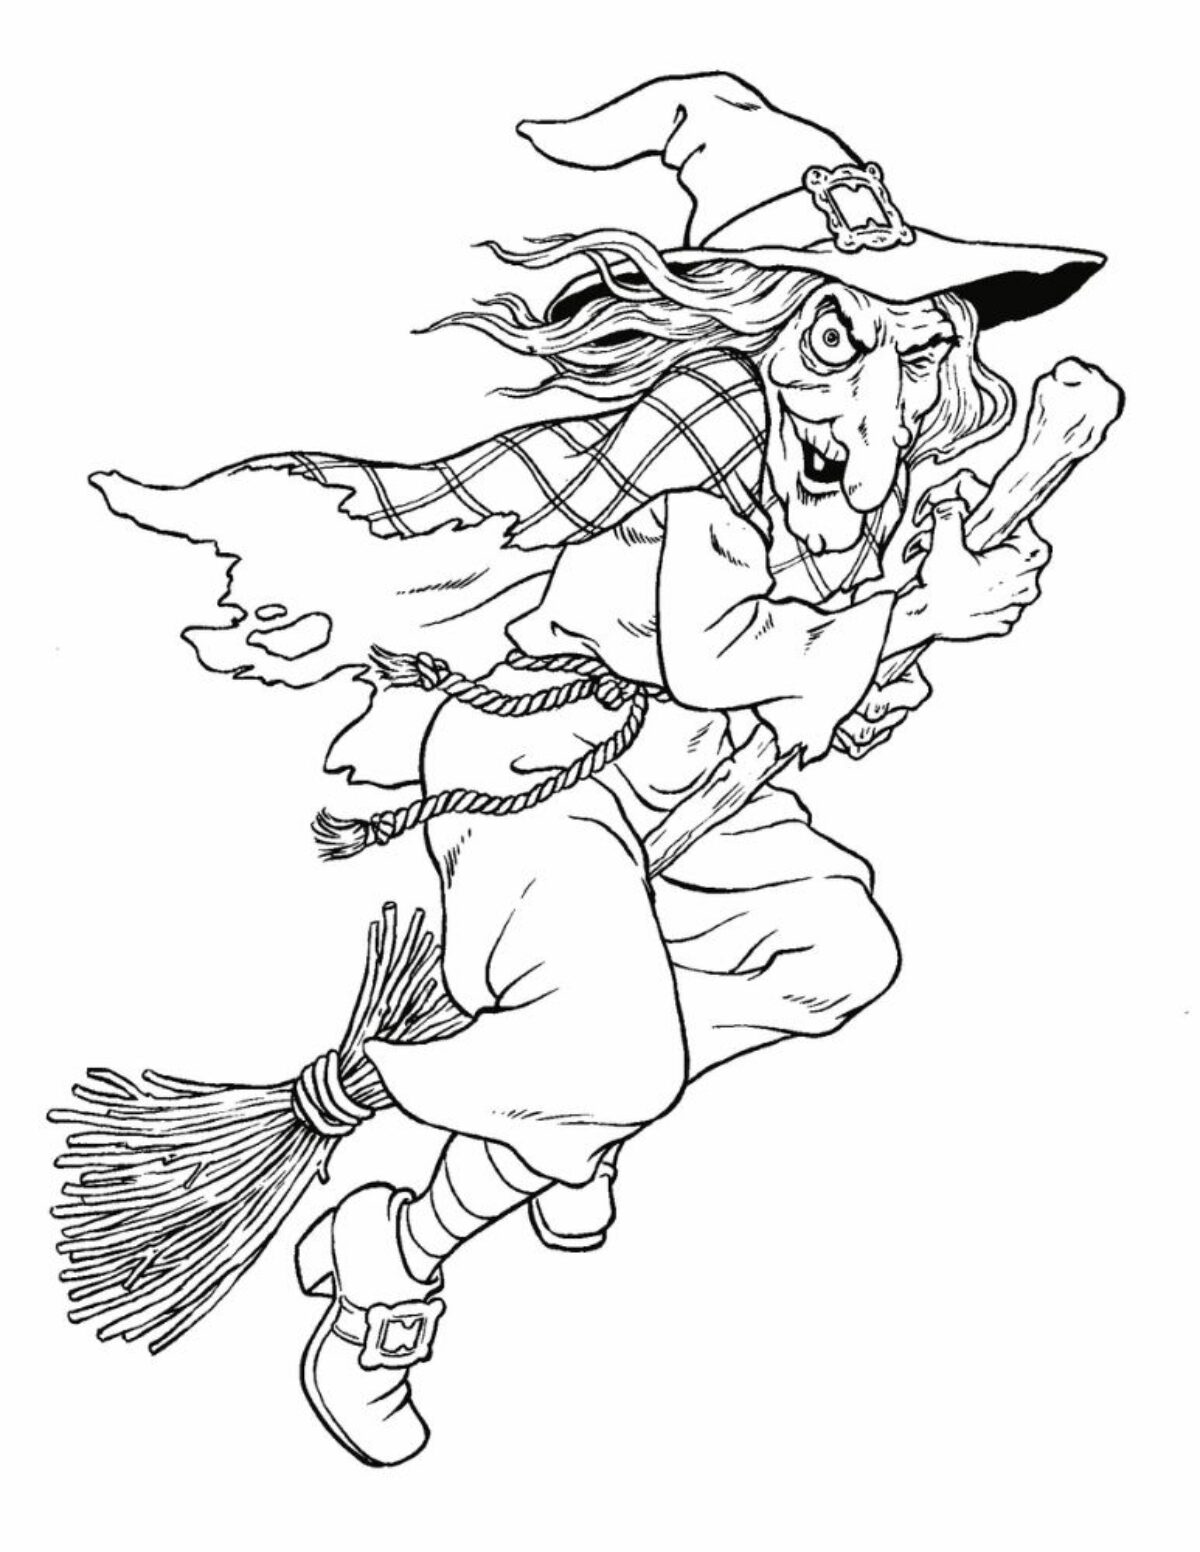 scary witch drawing